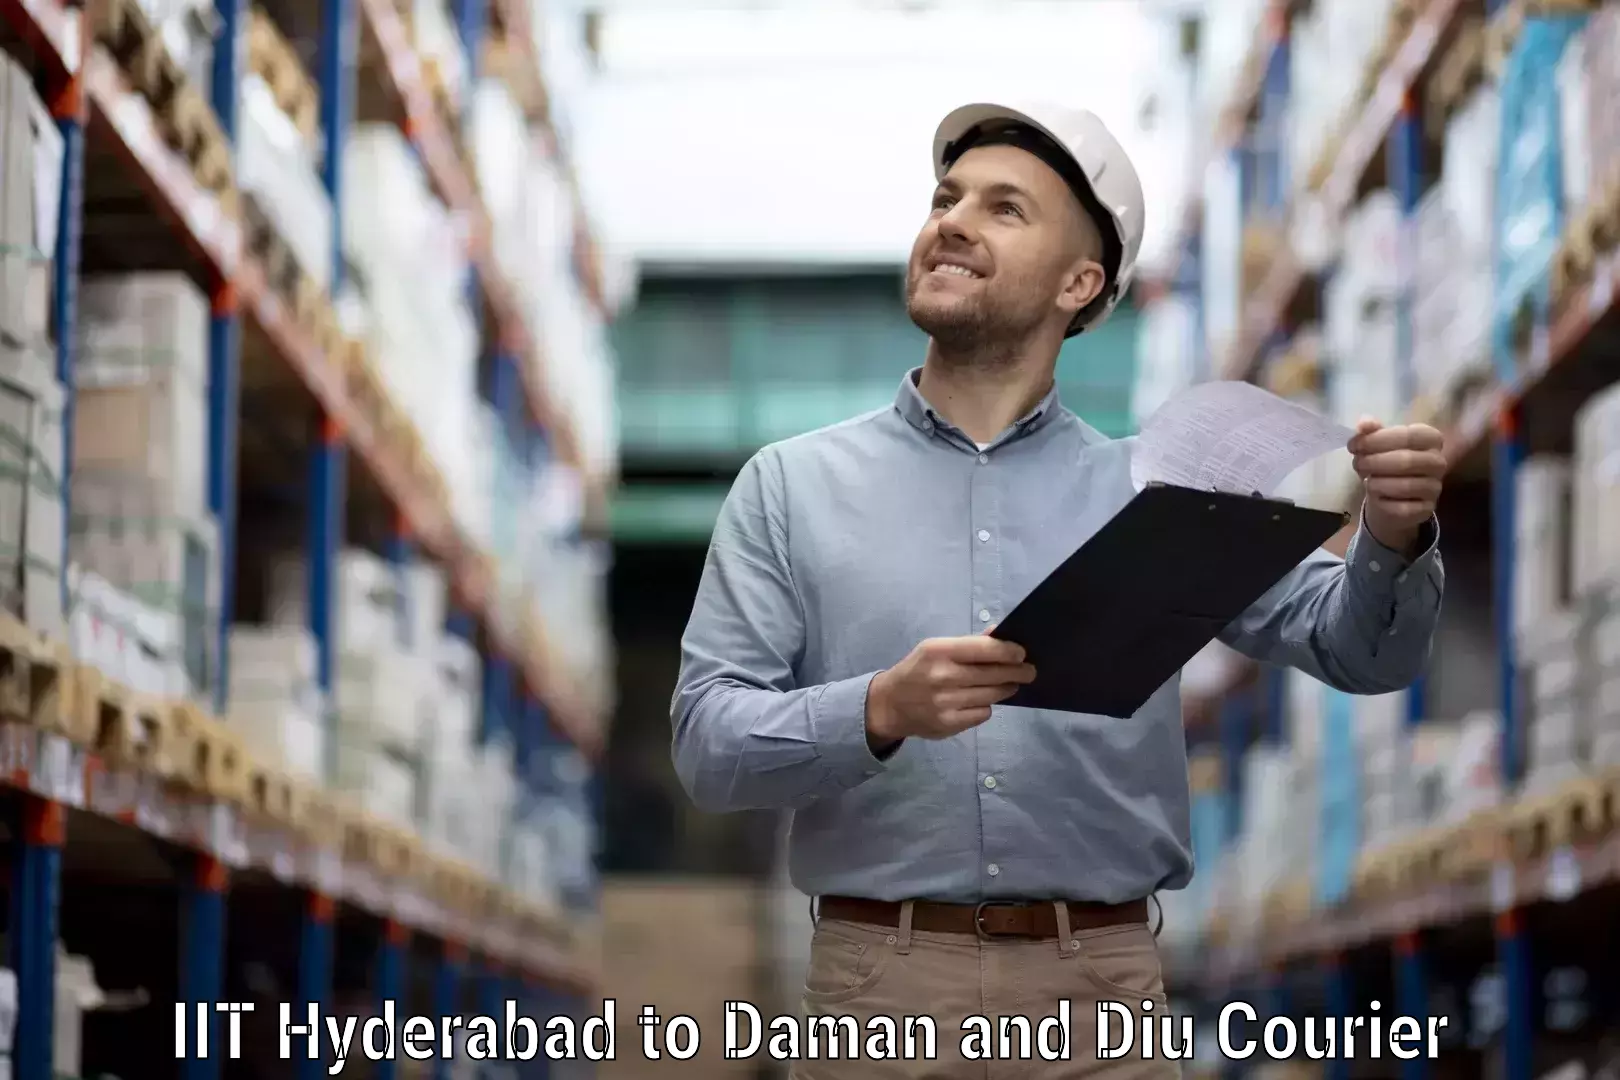 Same-day delivery solutions IIT Hyderabad to Diu